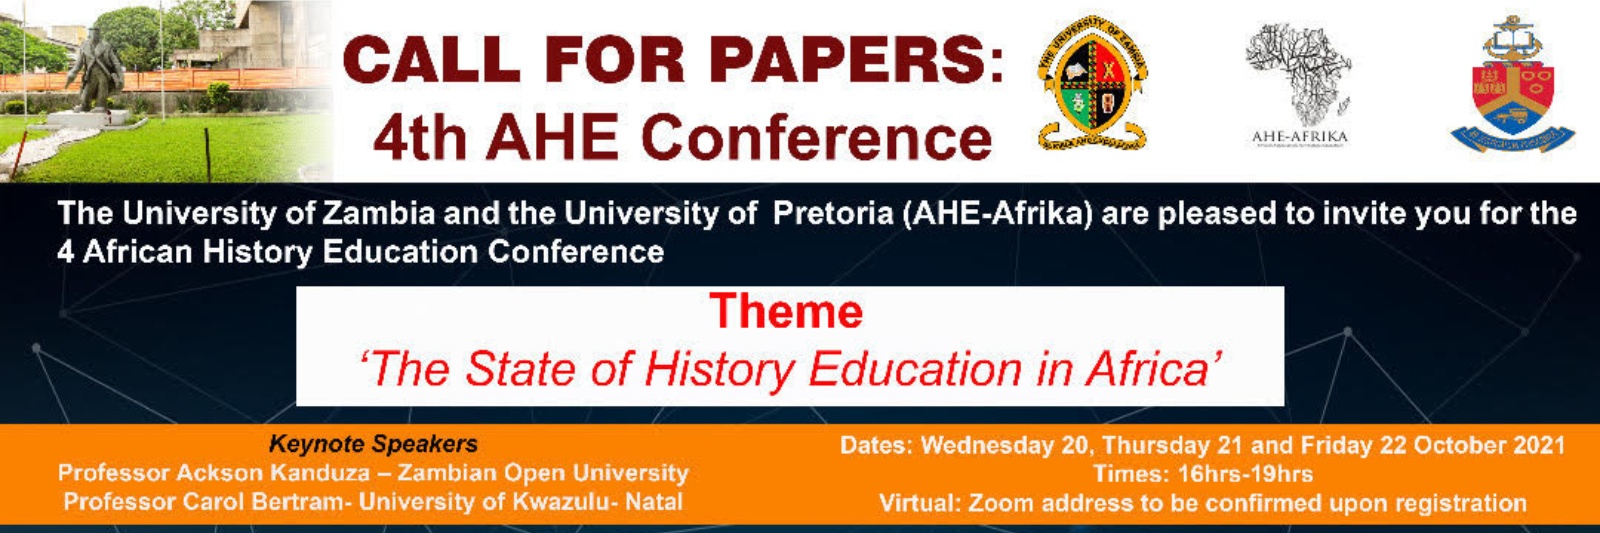 AHE - HISTORY CONFERENCE